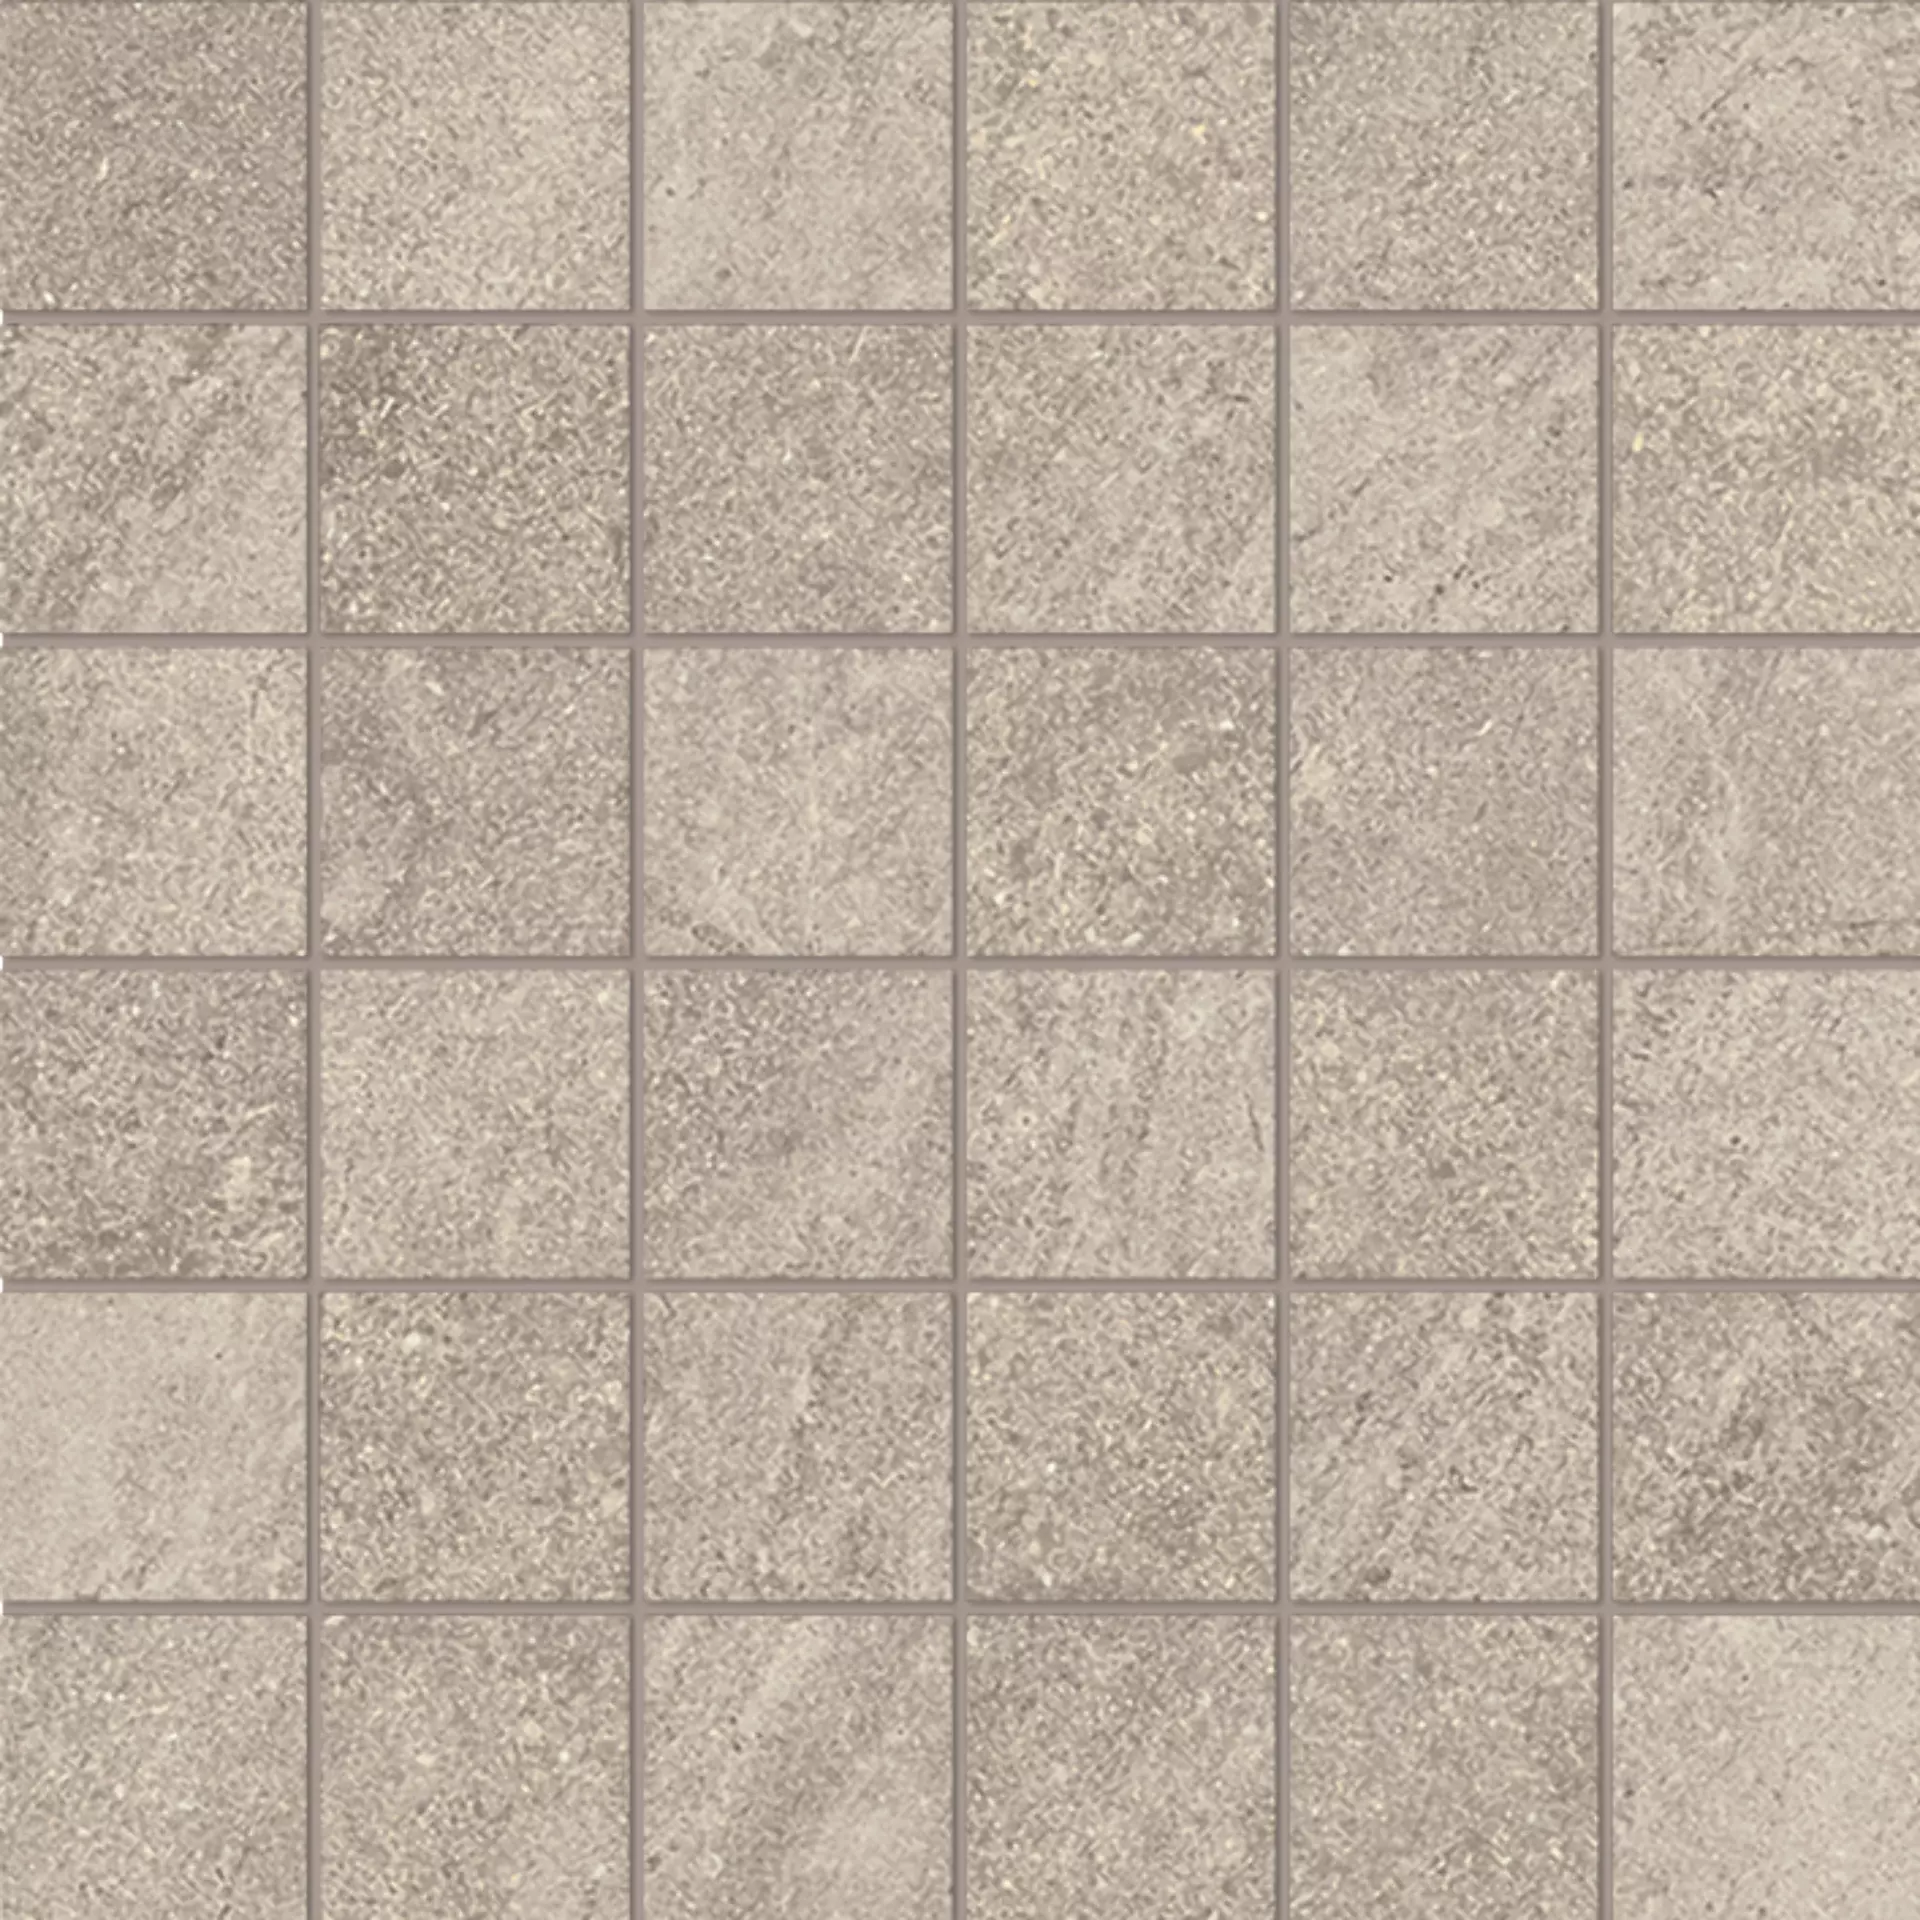 Fondovalle Planeto Moon Natural Mosaic 36 Pezzi PNT024A 30x30cm rectified 8,5mm